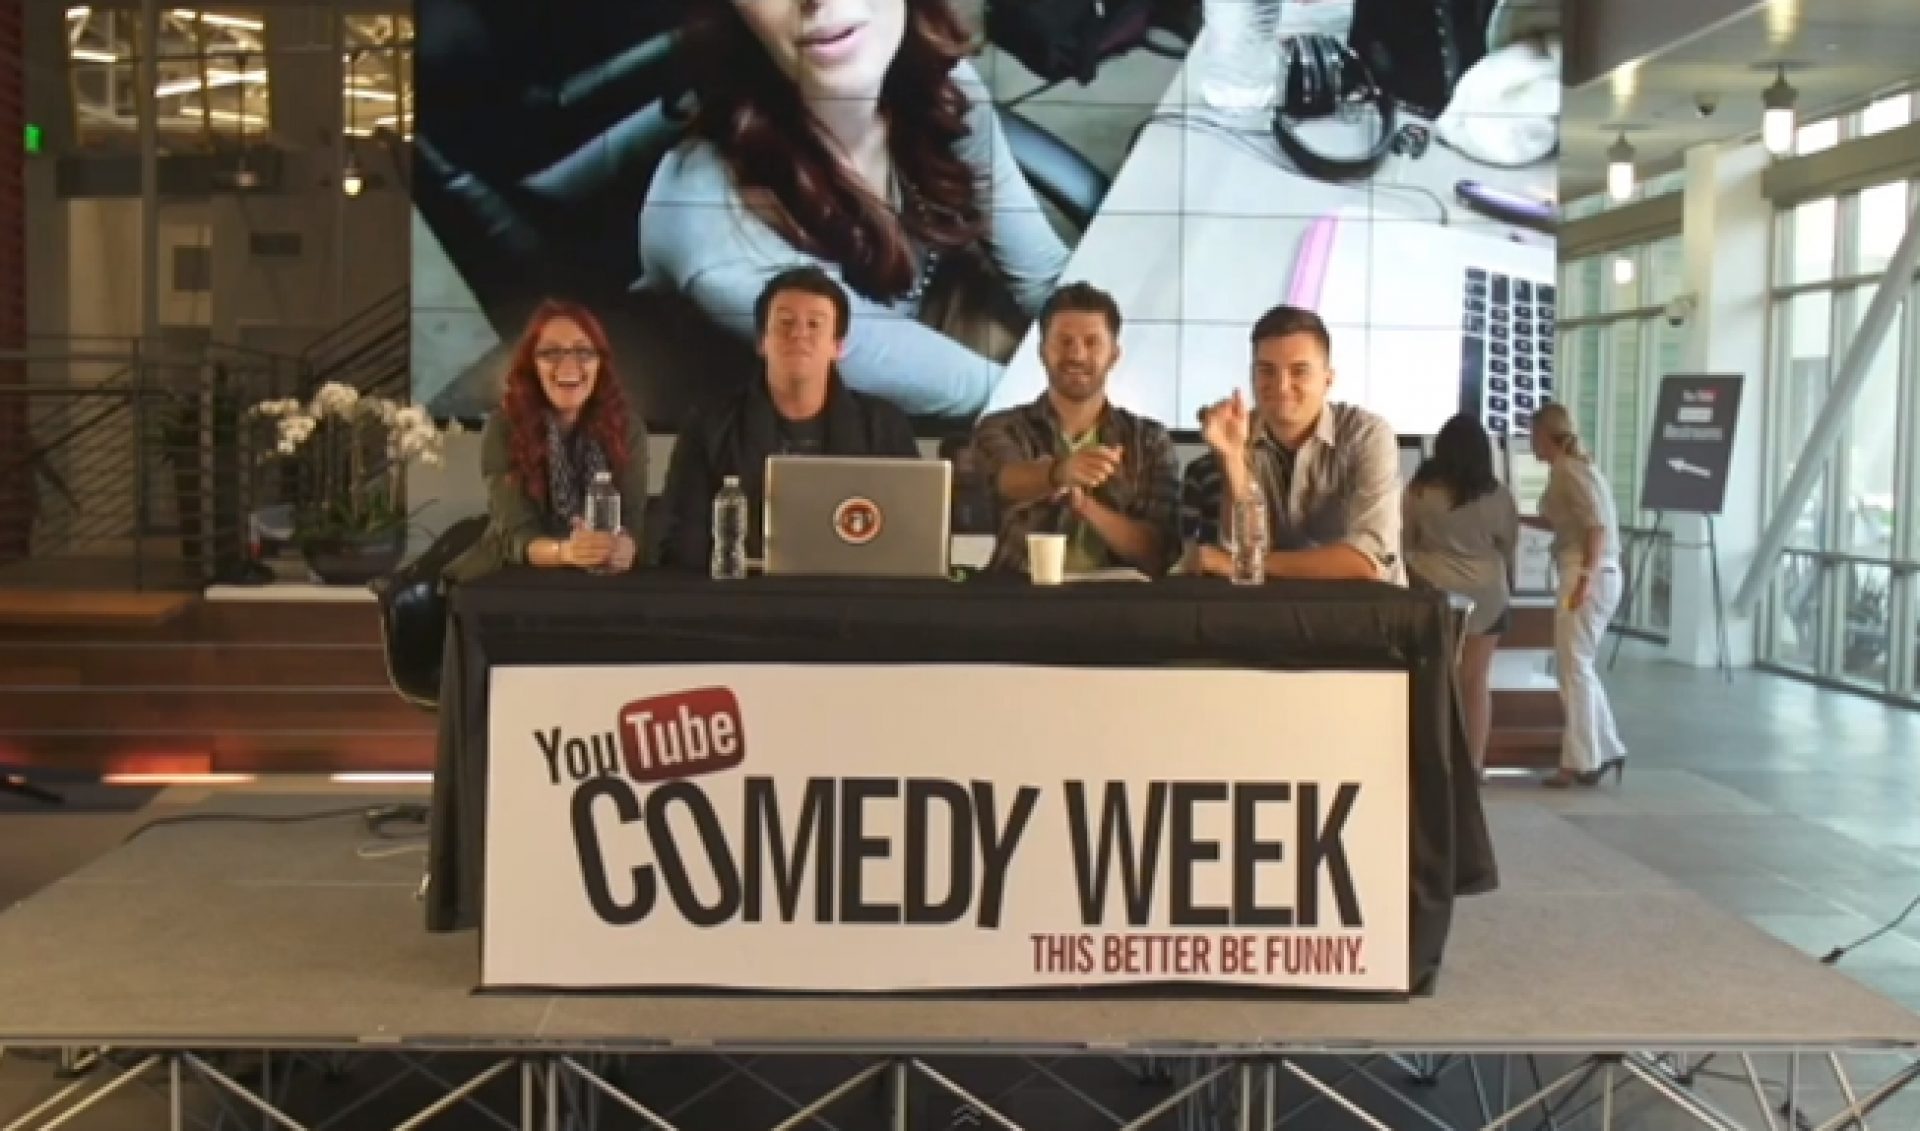 SourceFed Live Stream’s Numbers And Engagement Were Very Good